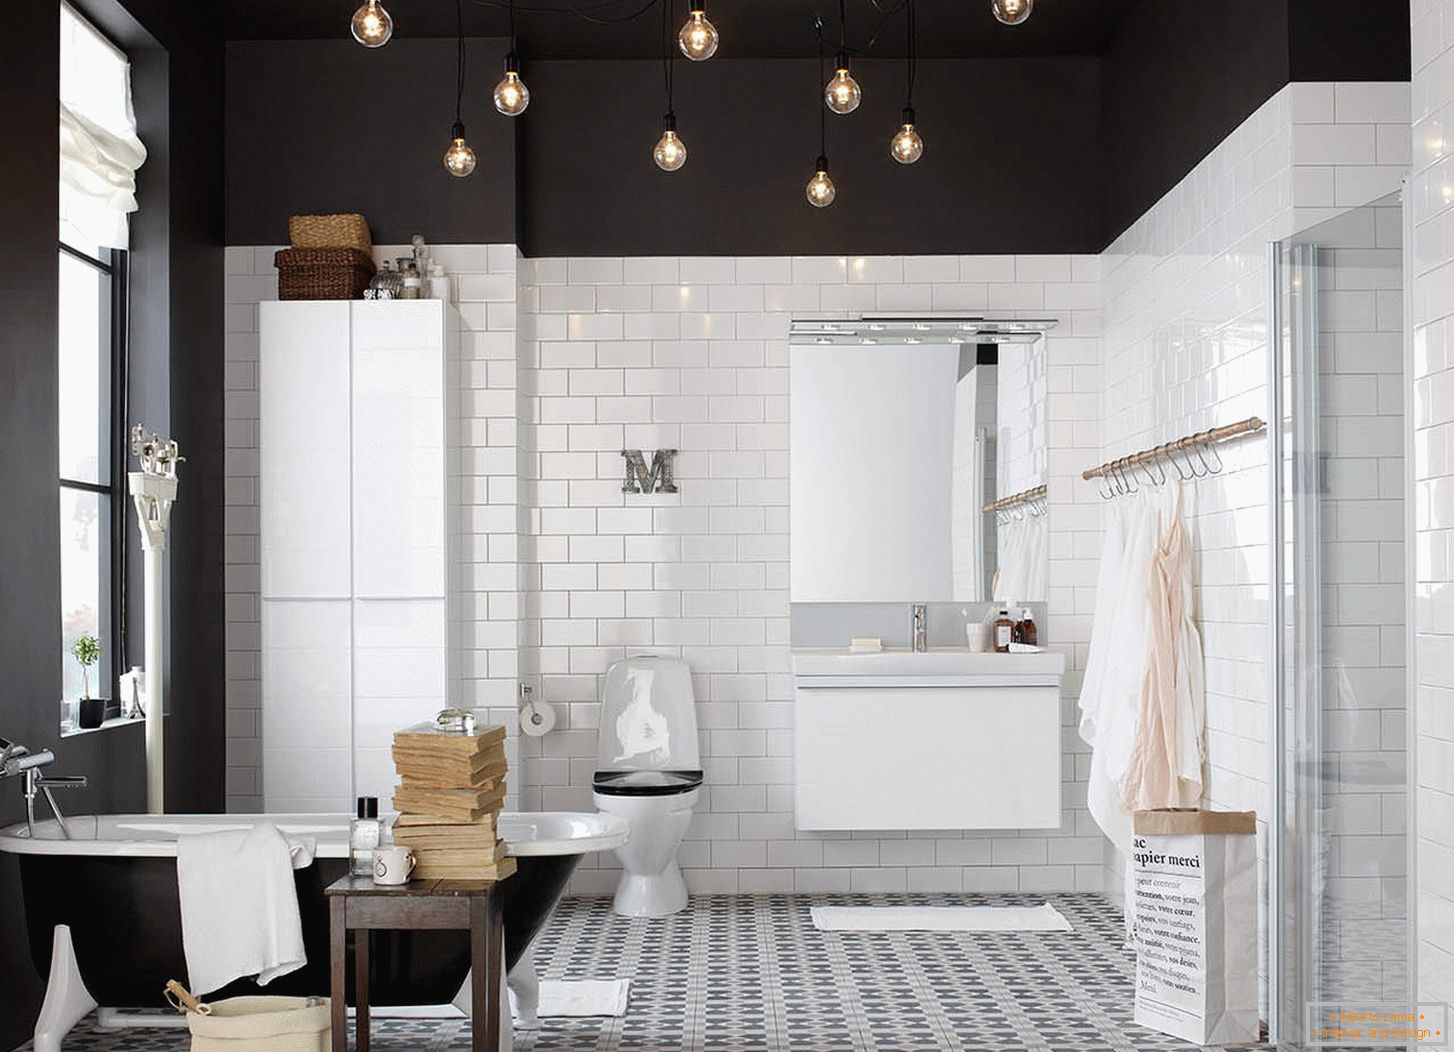 Black ceiling with lighting in the bathroom